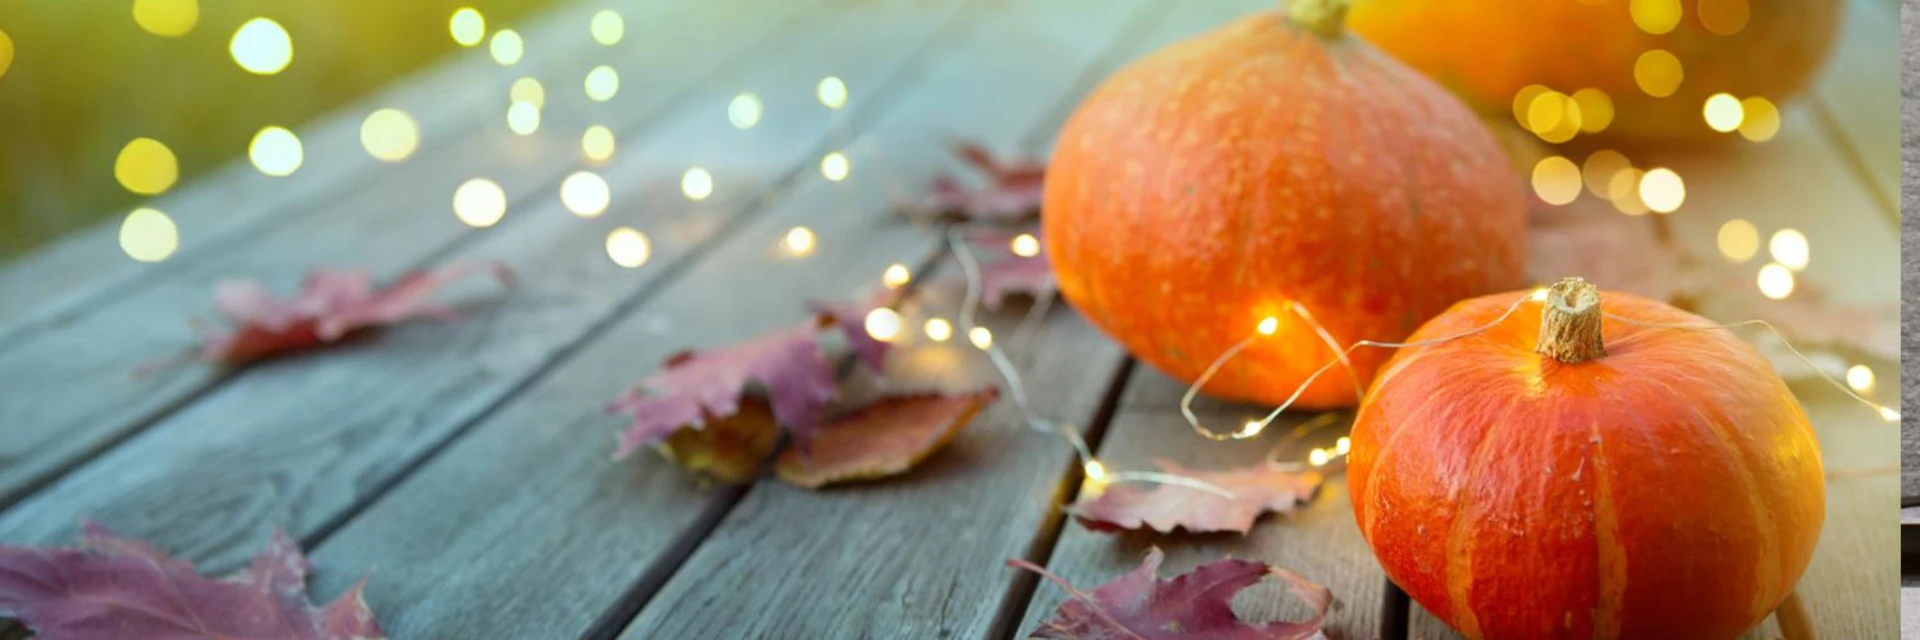 SCORE GREAT DEALS ON FALL DÉCOR, FESTIVALS SWEET TREATS AND MORE